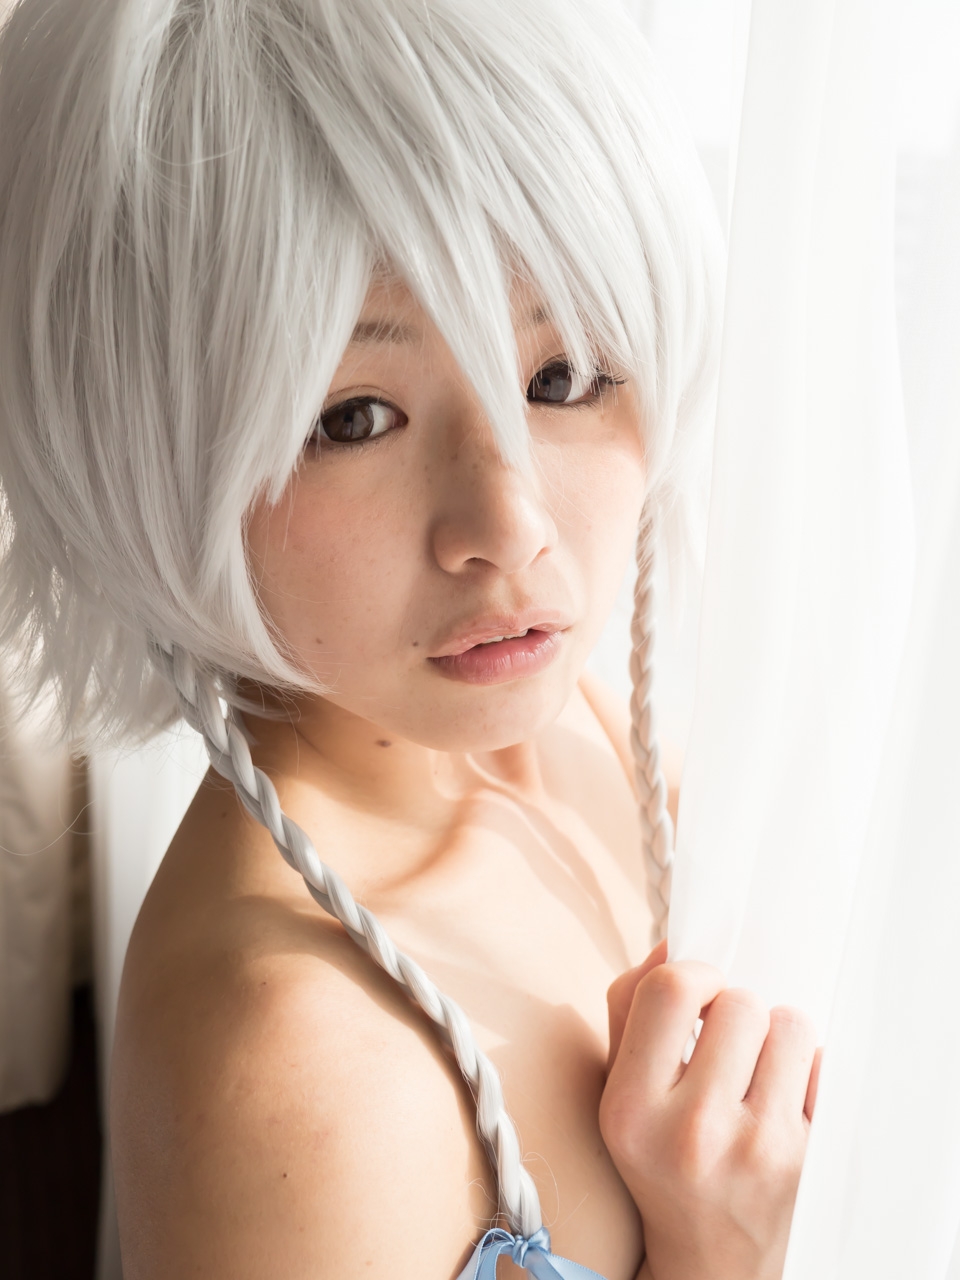 [Sakaki Cosplay Mistress] Sakaki Cosplay Mistress DL 001 (Touhou Project) 48